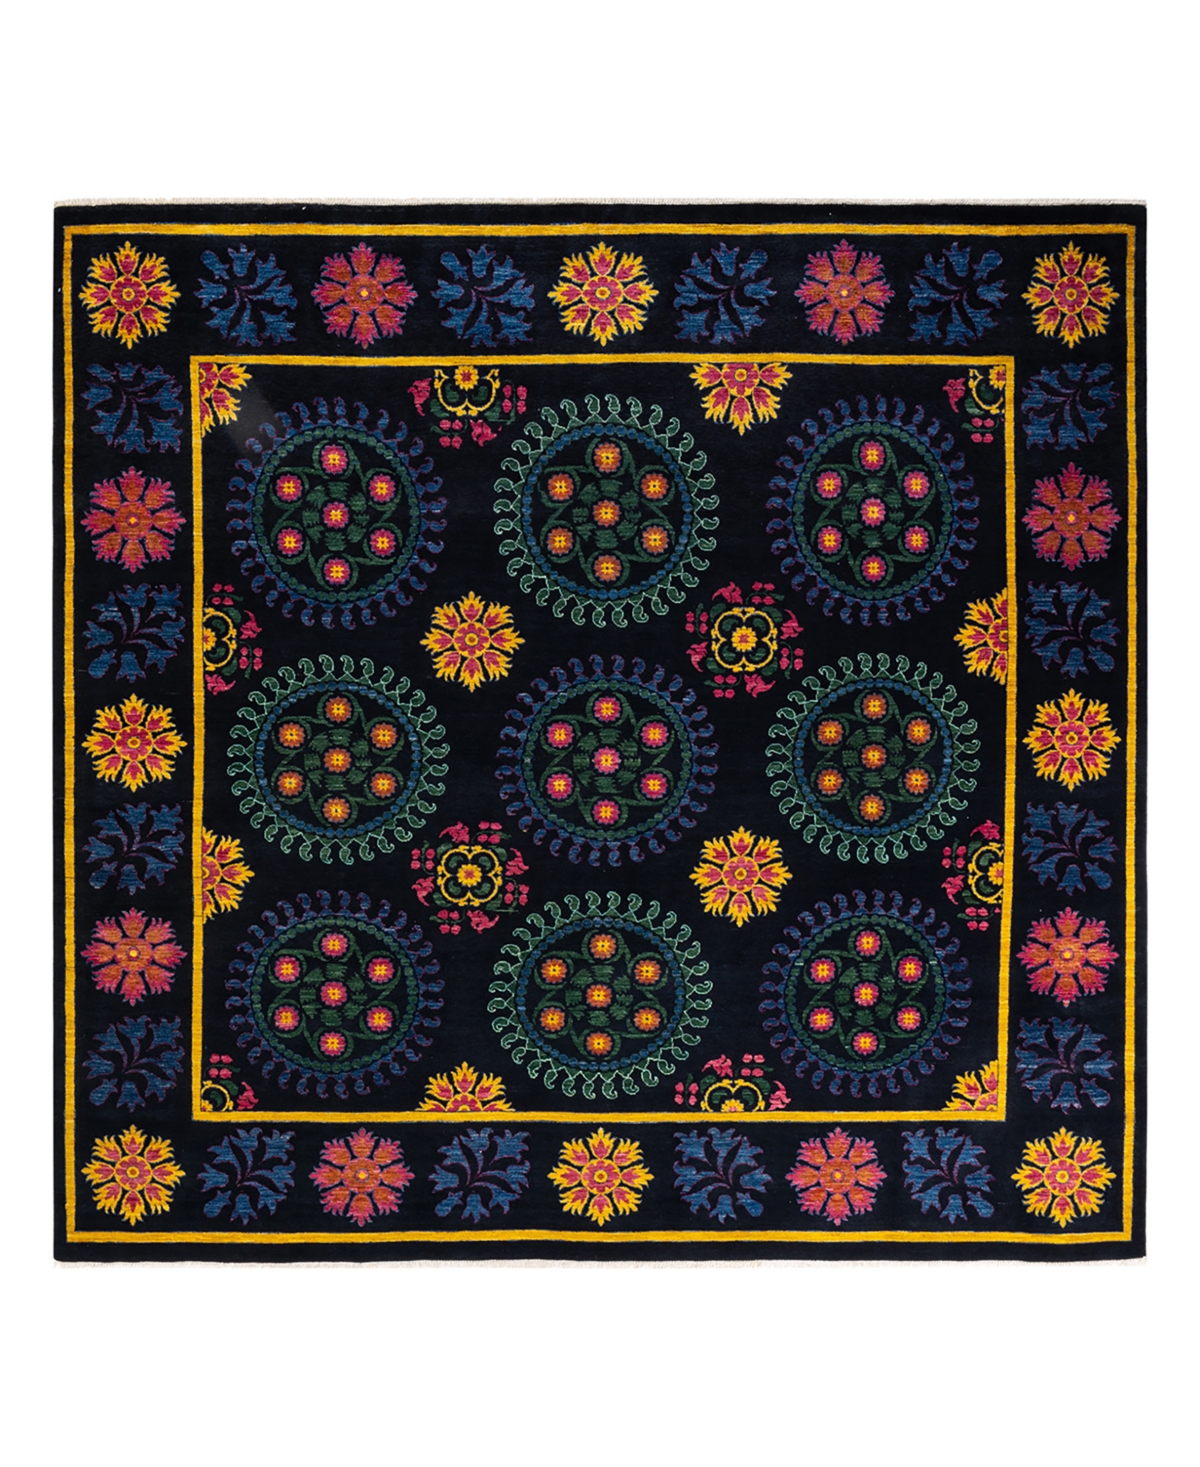 Adorn Hand Woven Rugs Suzani M1701 9'4in x 10'1in Area Rug - Black